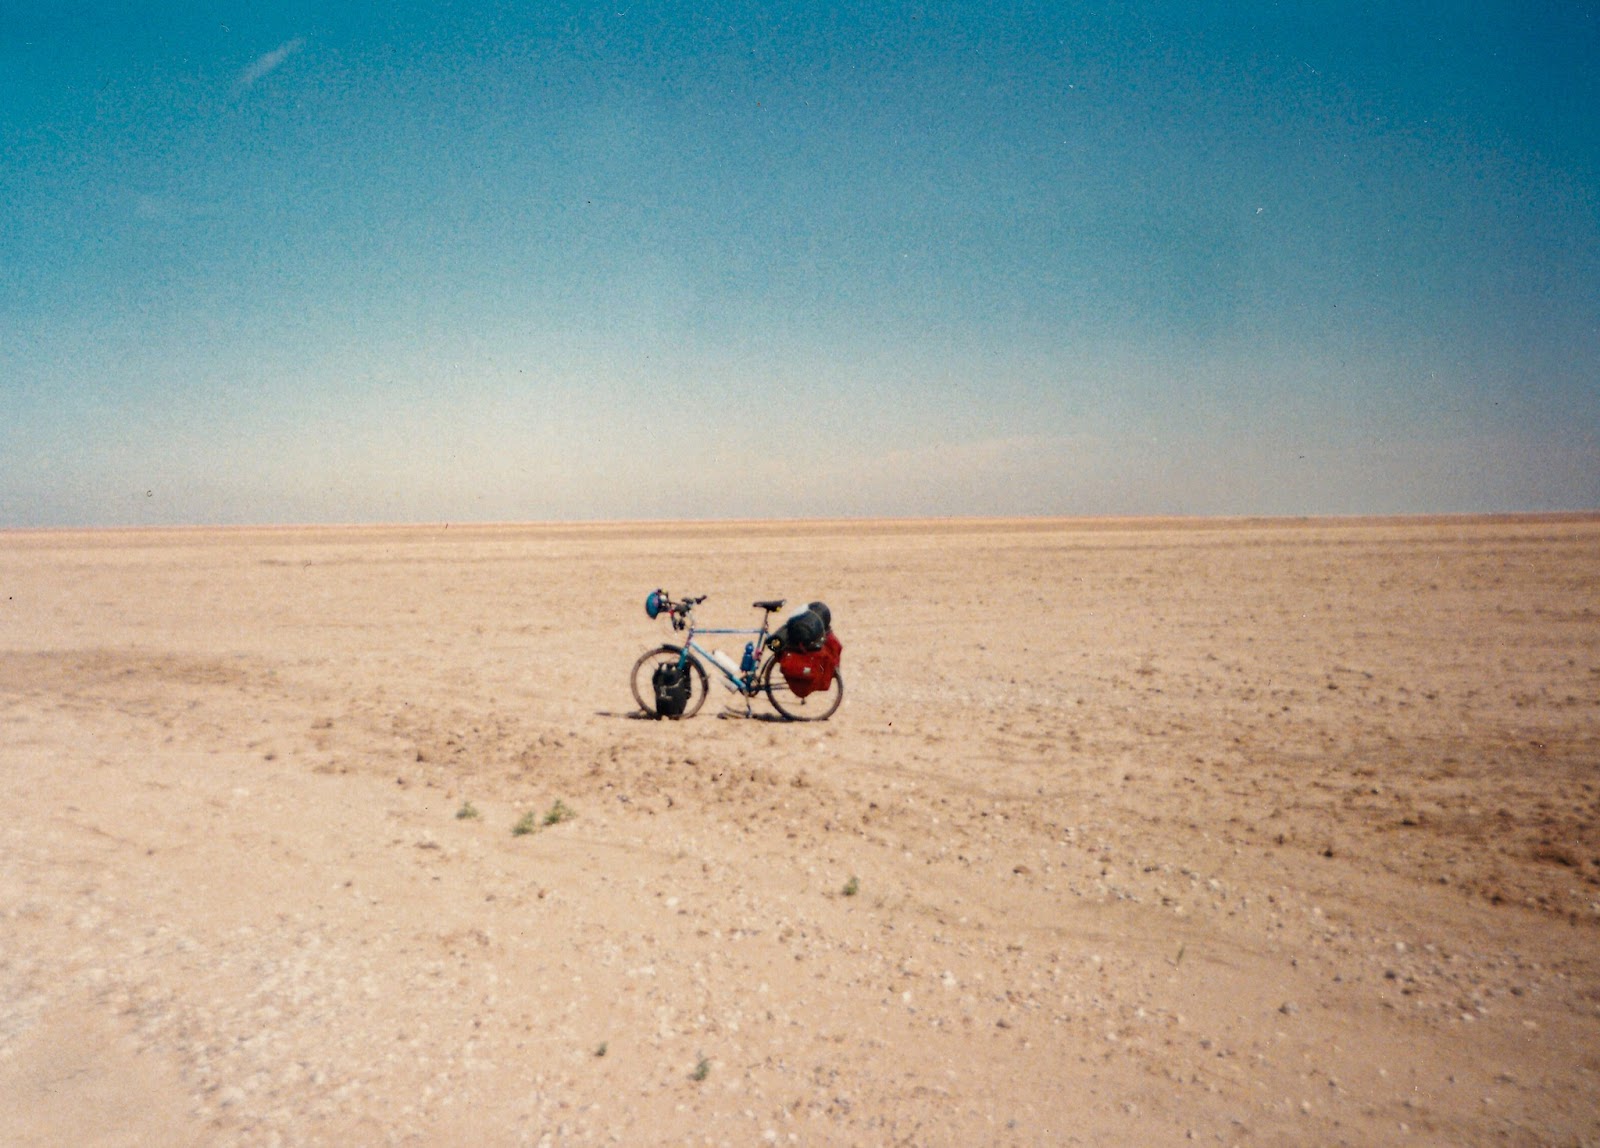 A bicycle is in a dirt field with no contour that stretches into the distance under a blue cloudless sky. 